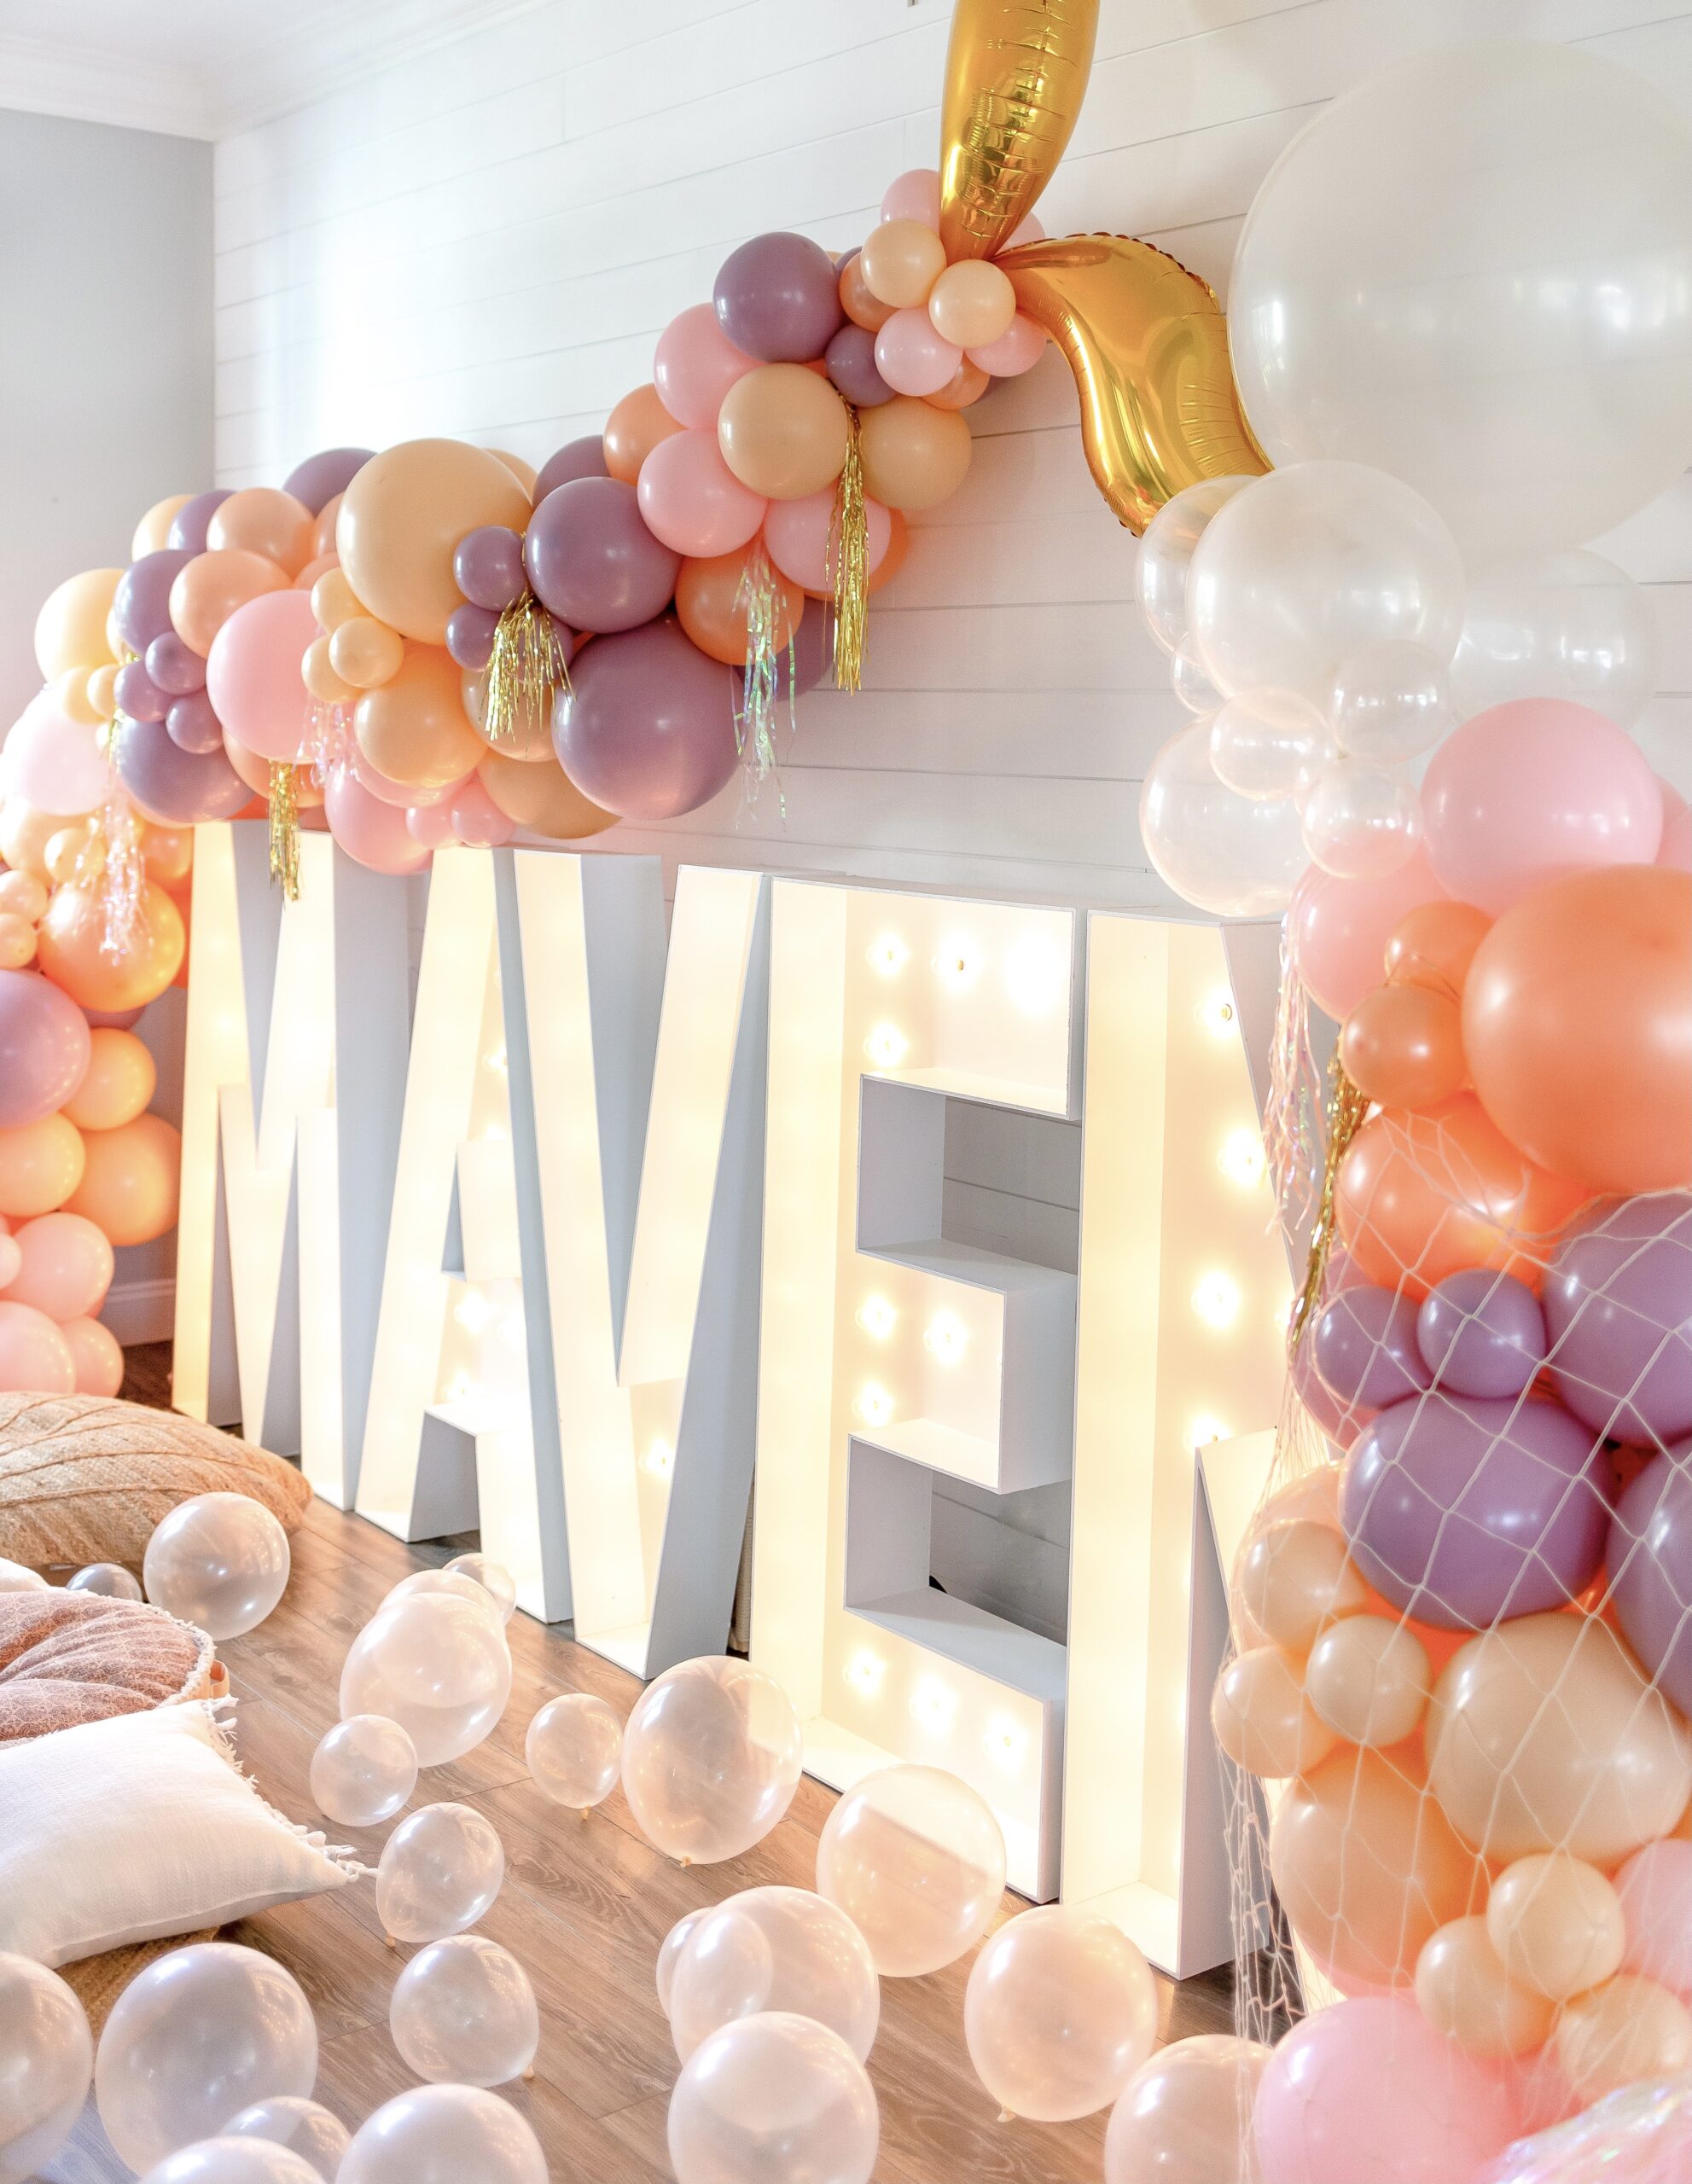 Maven in light up letters with purple, pink, peach and cream balloons in the shape of a mermaid tail